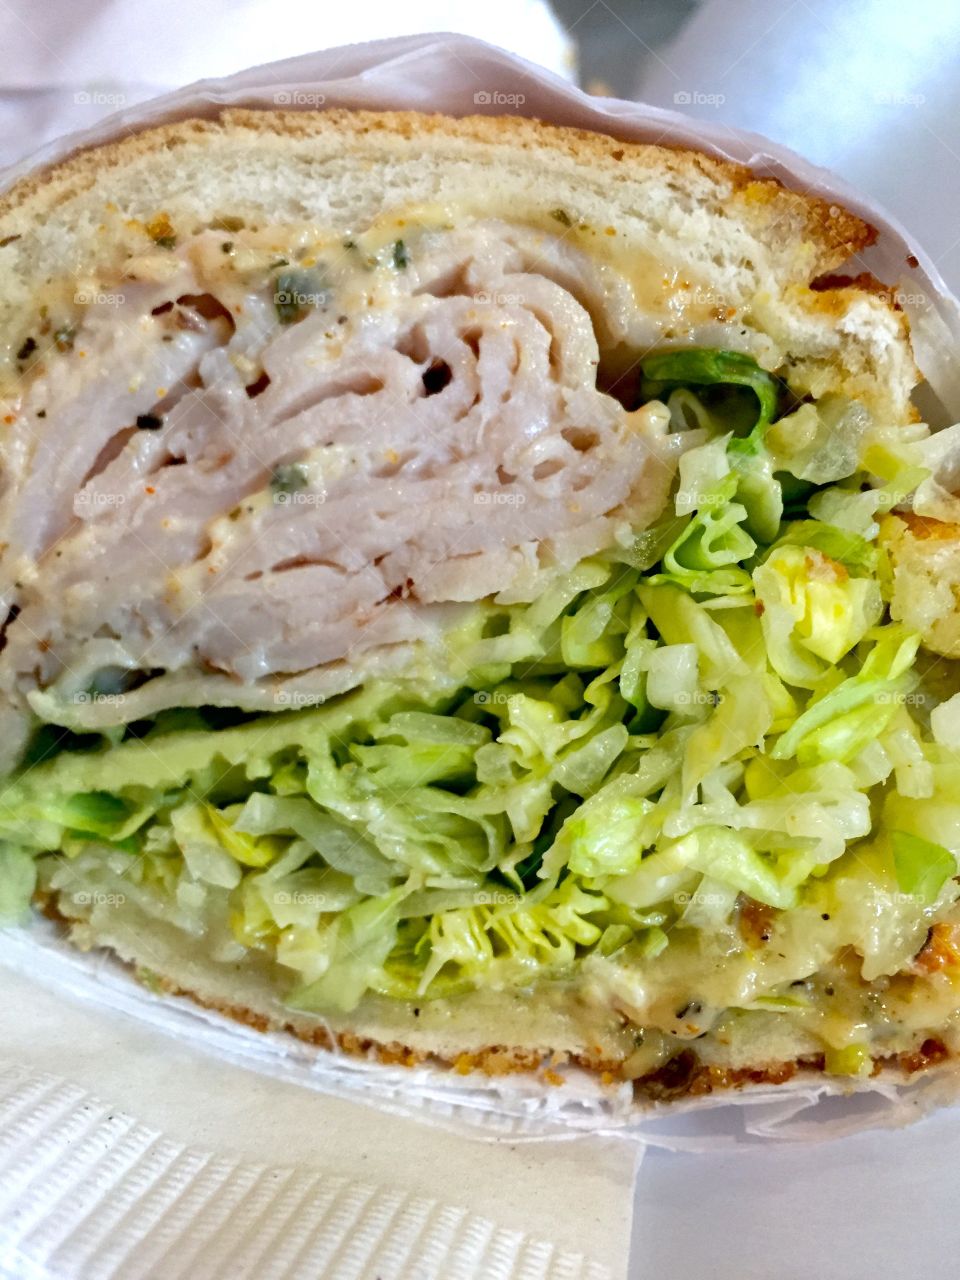 Packed submarine sandwich cut in half featuring turkey, melted cheese, shredded lettuce, and condiments.